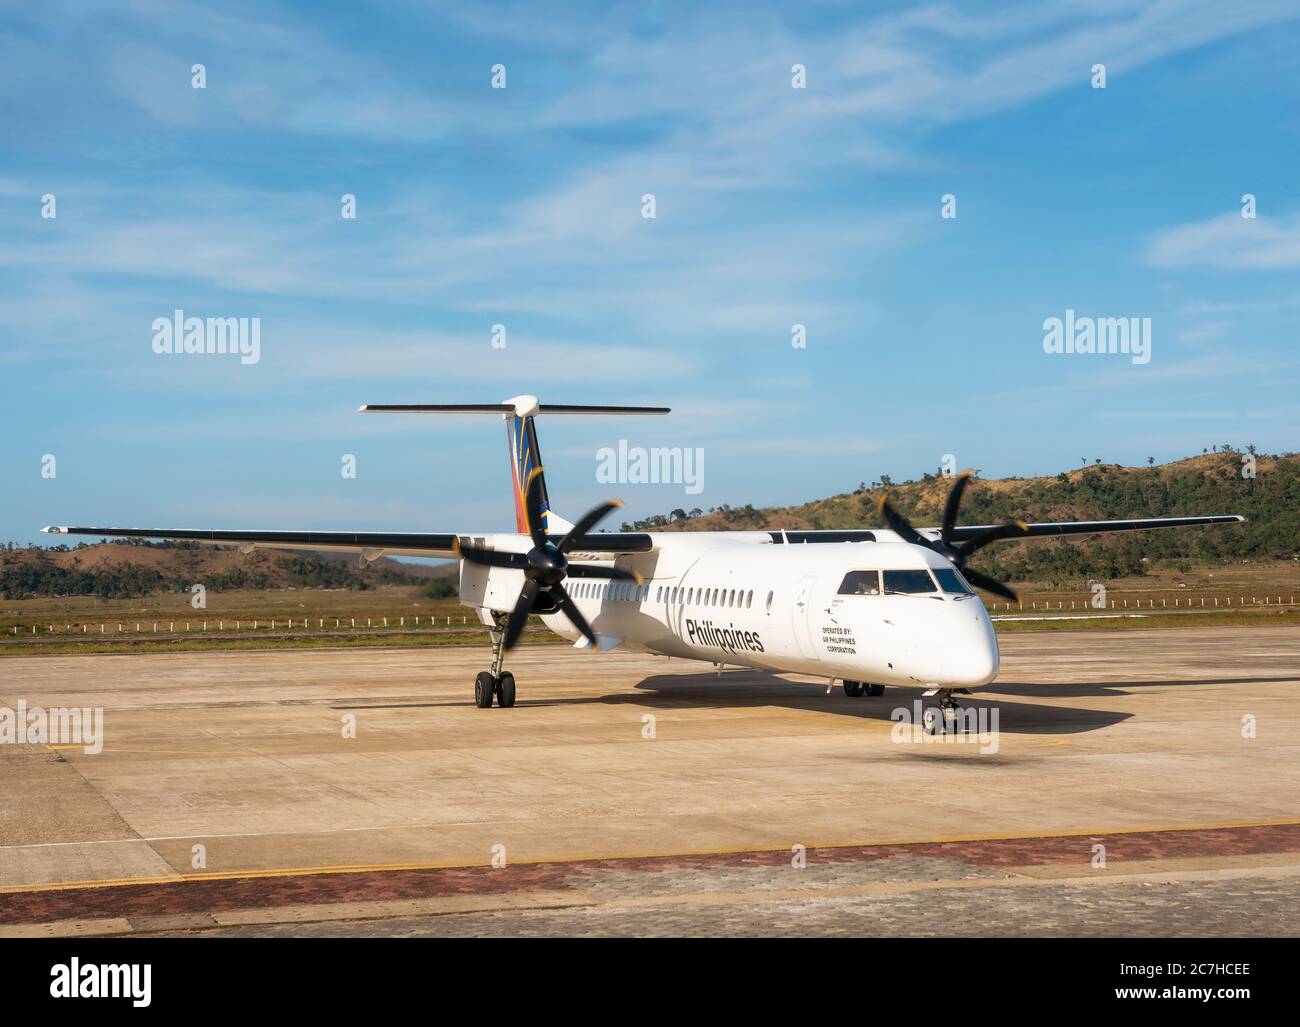 San Vicente, Philippines - January 30, 2019: Bombardier Q400 airplane Philippine Airlines at small Airport in Busuanga Island. Stock Photo